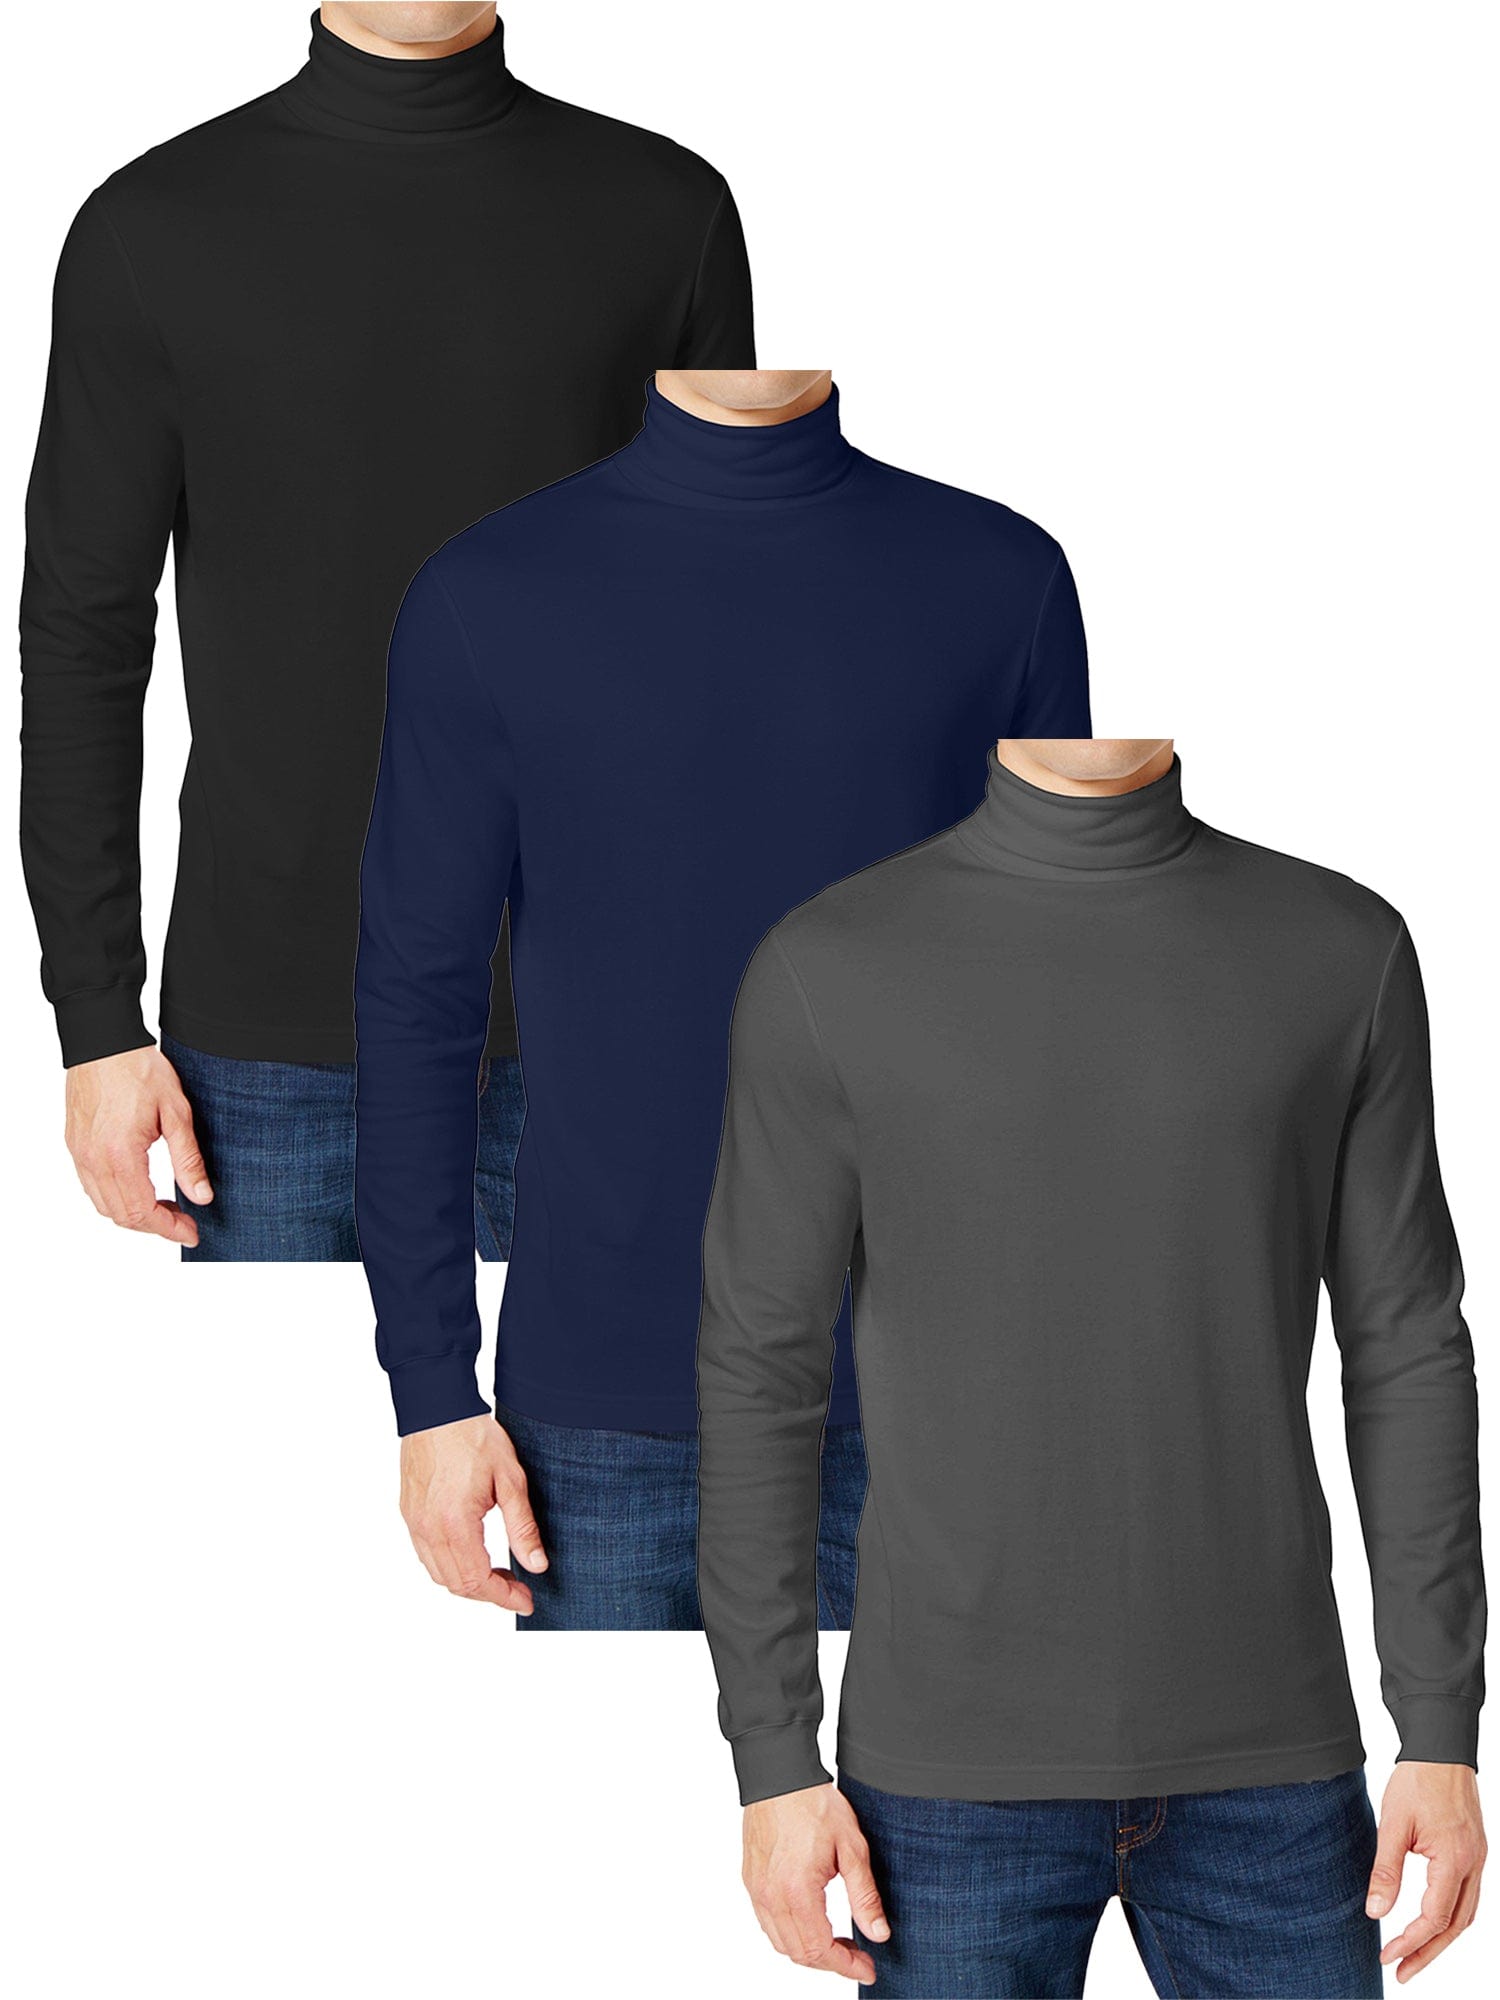 3-Pack Men's Long Sleeve Turtle Neck T-Shirt (Sizes, S to 2XL) - GalaxybyHarvic